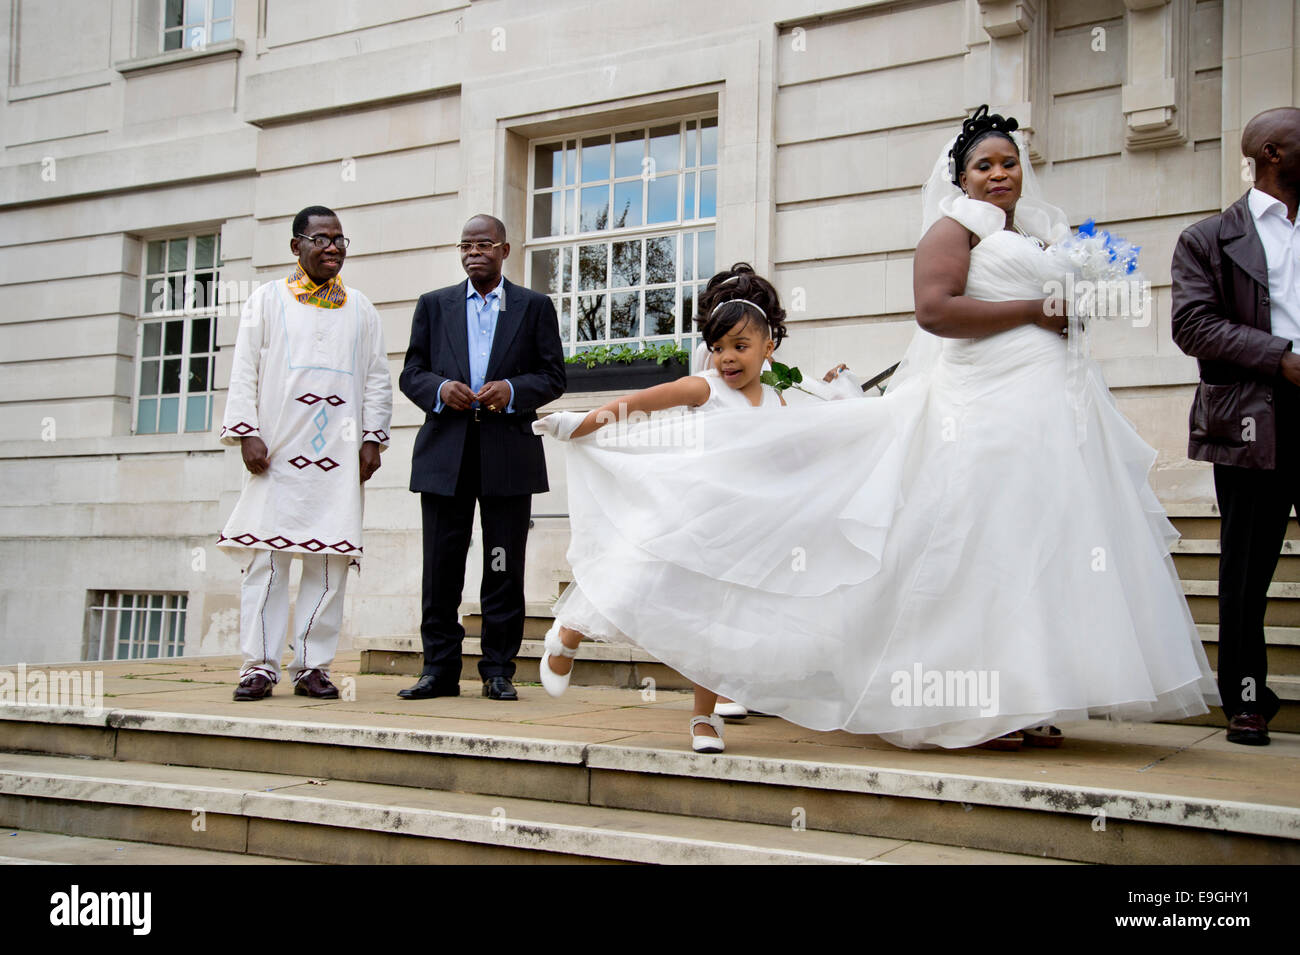 Hackney Town Hall. Registry Office wedding. Bride wearing white about to enter, with young bridesmaid holding her train. Stock Photo